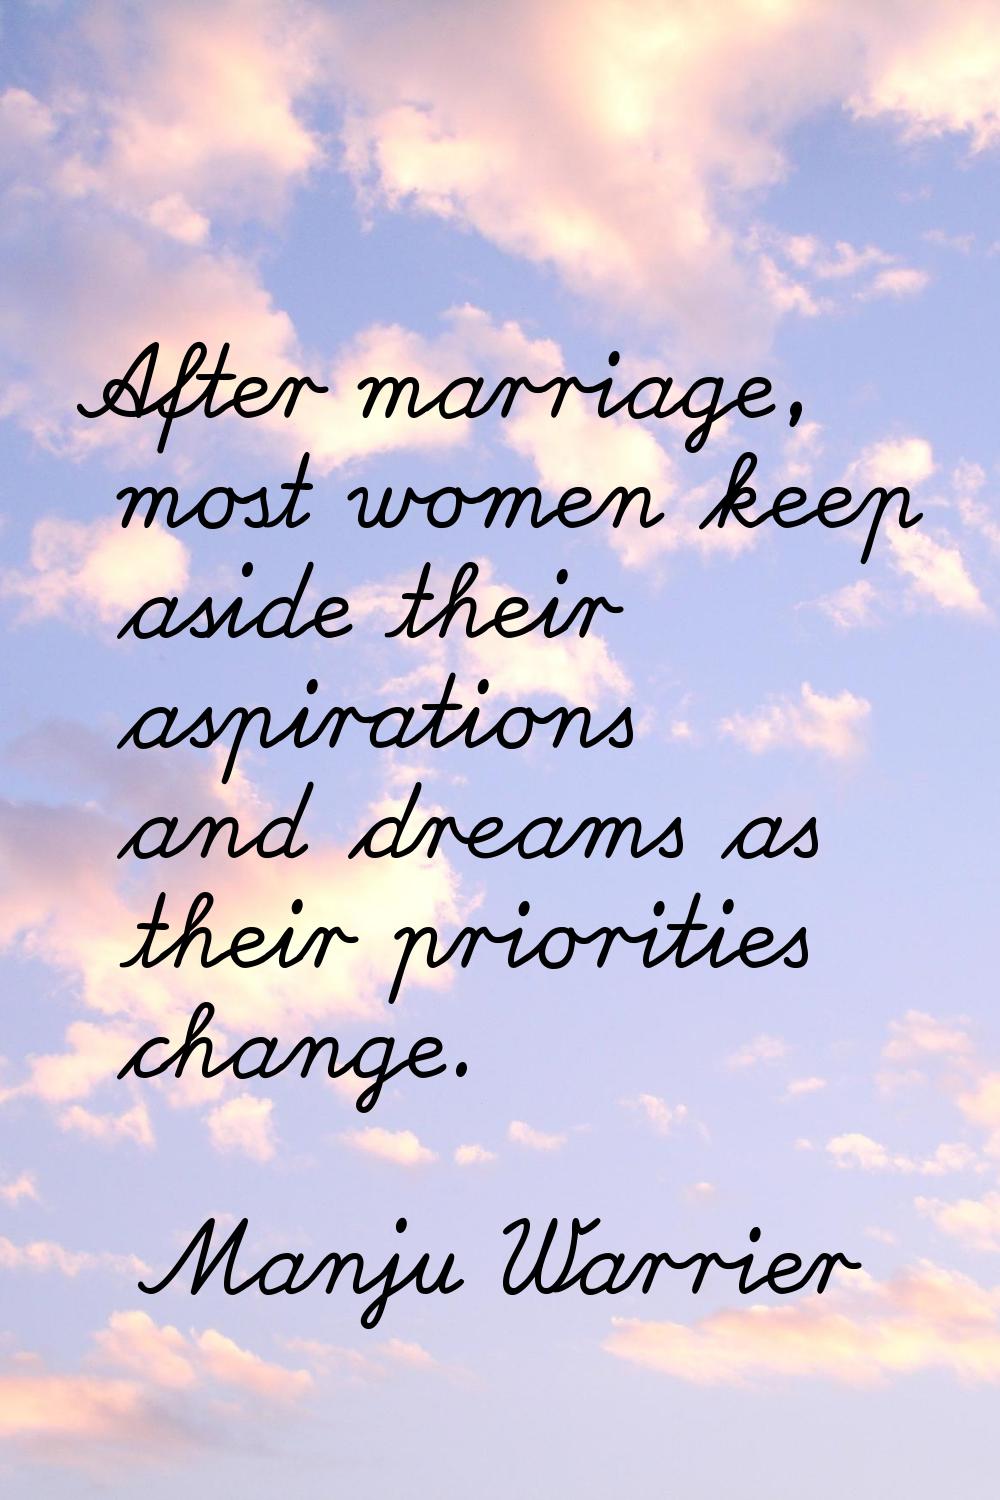 After marriage, most women keep aside their aspirations and dreams as their priorities change.